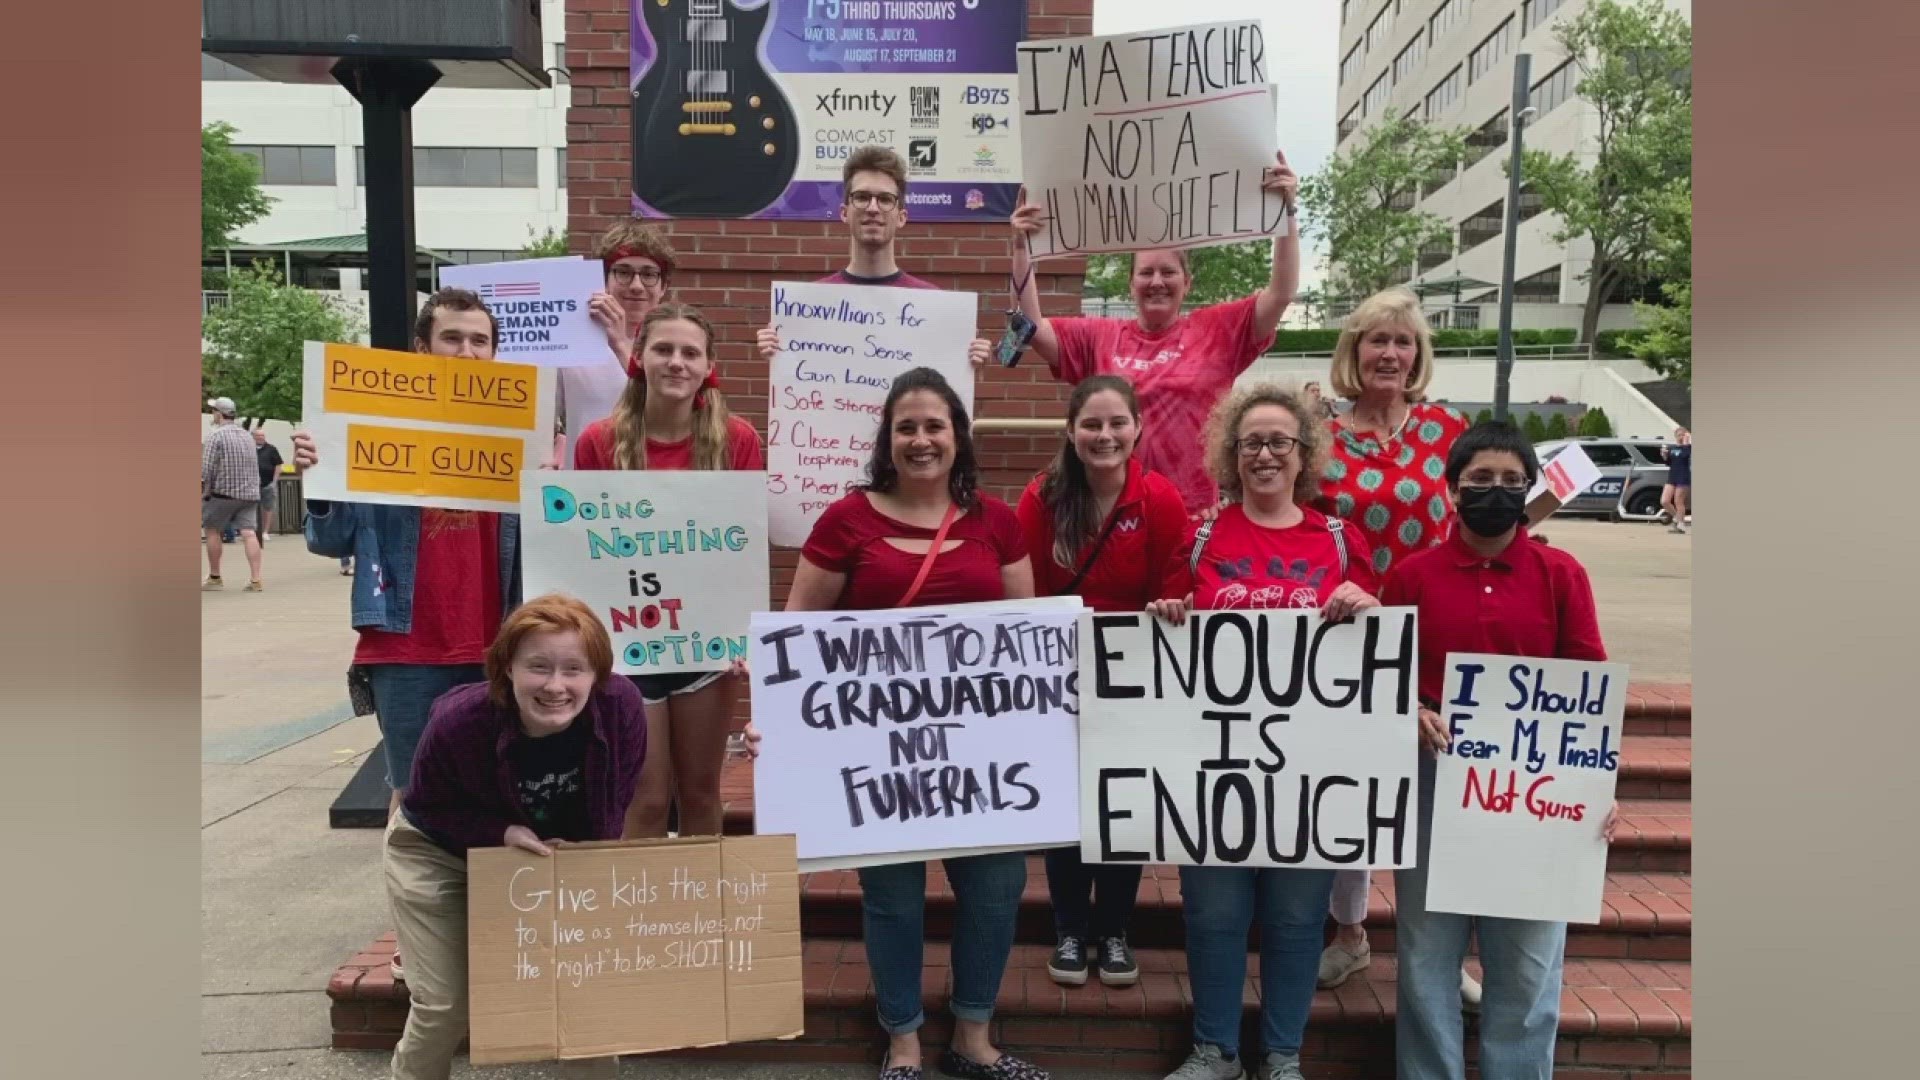 Friday night's Market Square rally was proposed by high school students wanting to see changes in the state's gun laws.